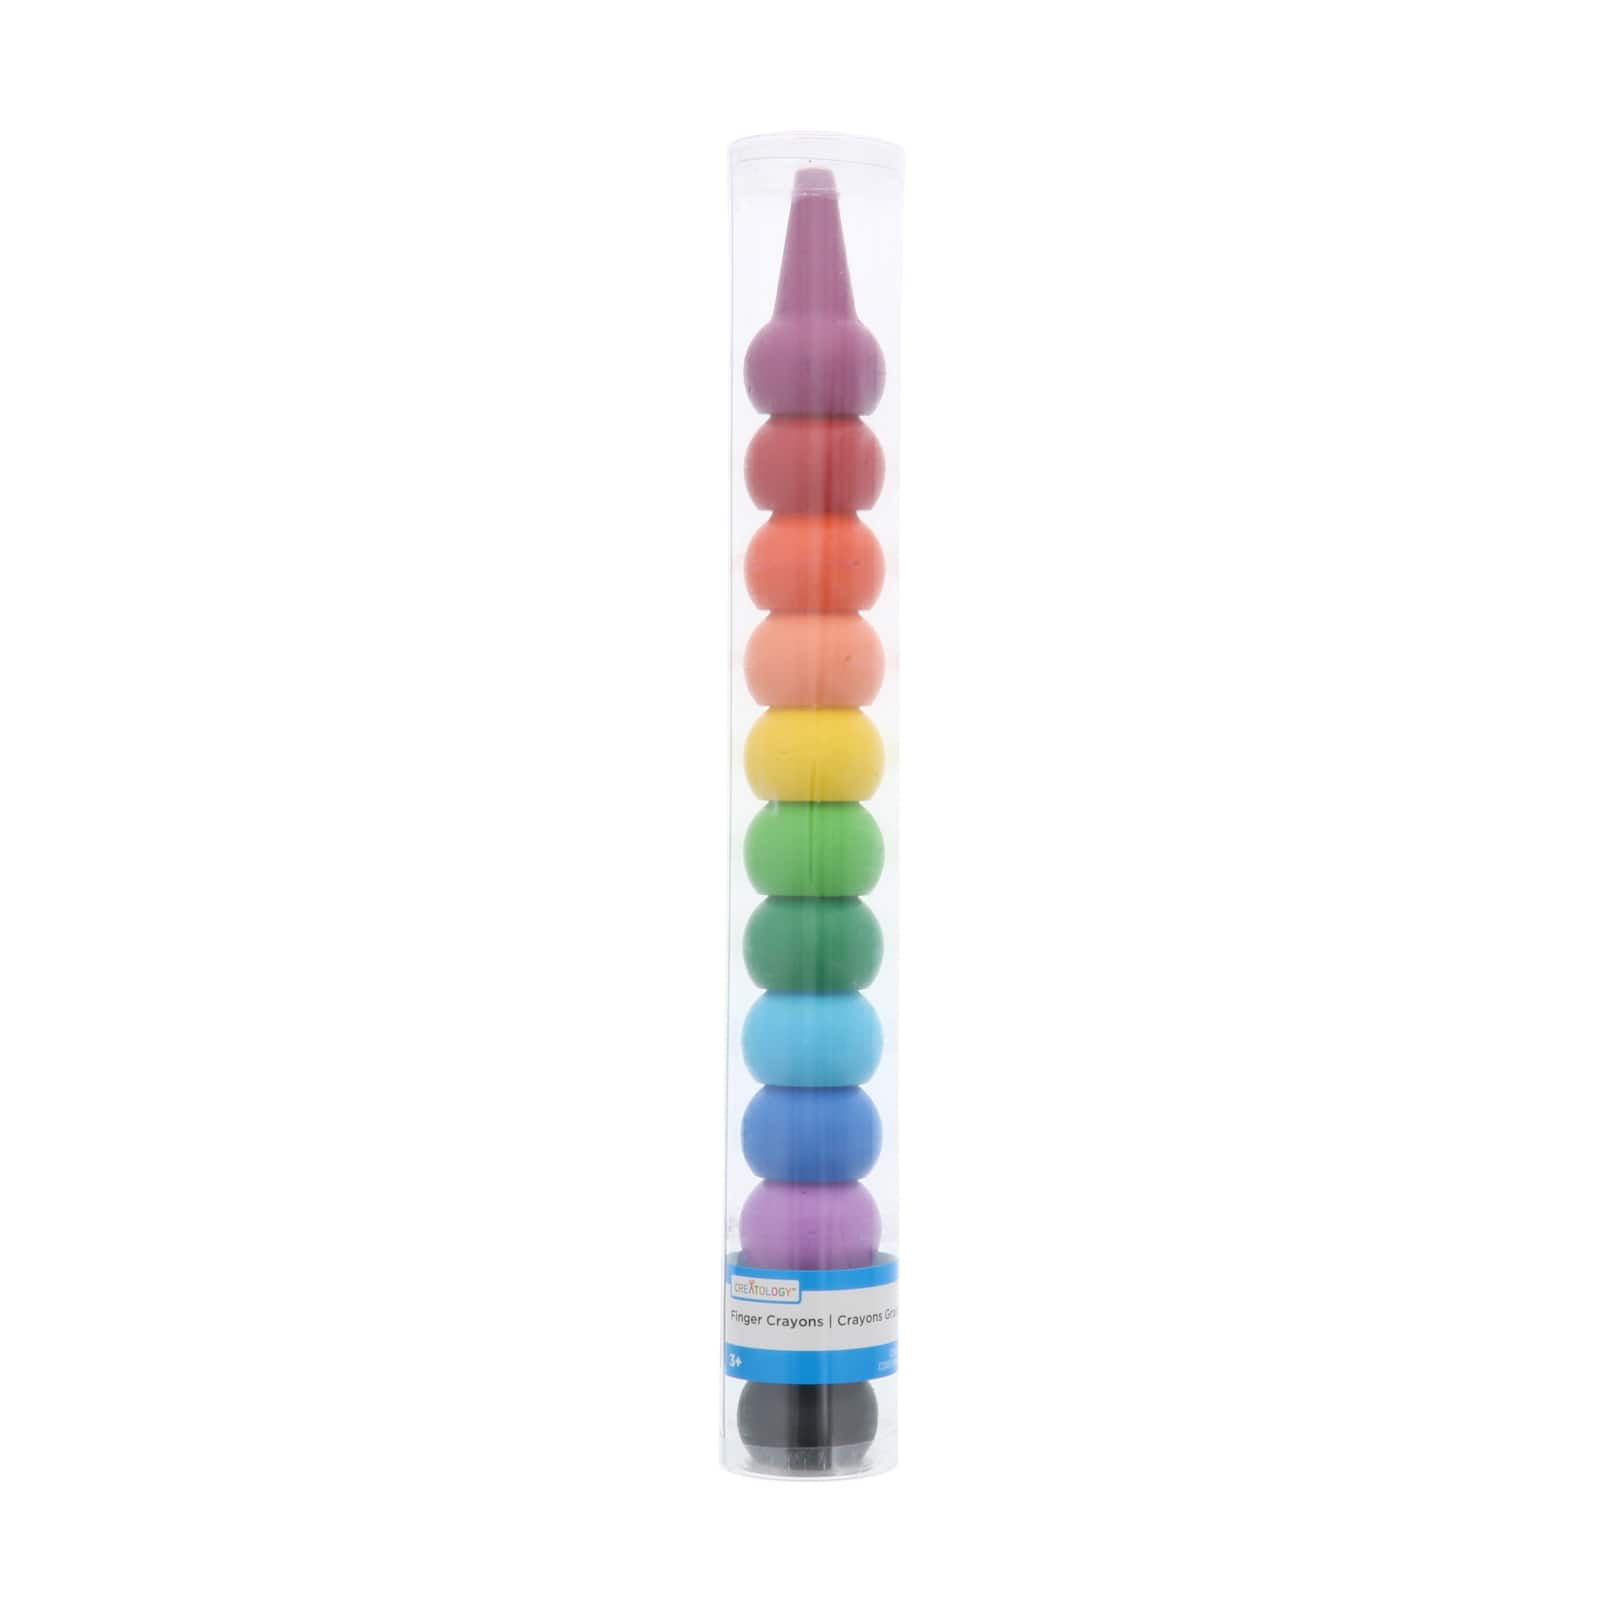 Fingers Crayons Set of 12 – Turner Toys